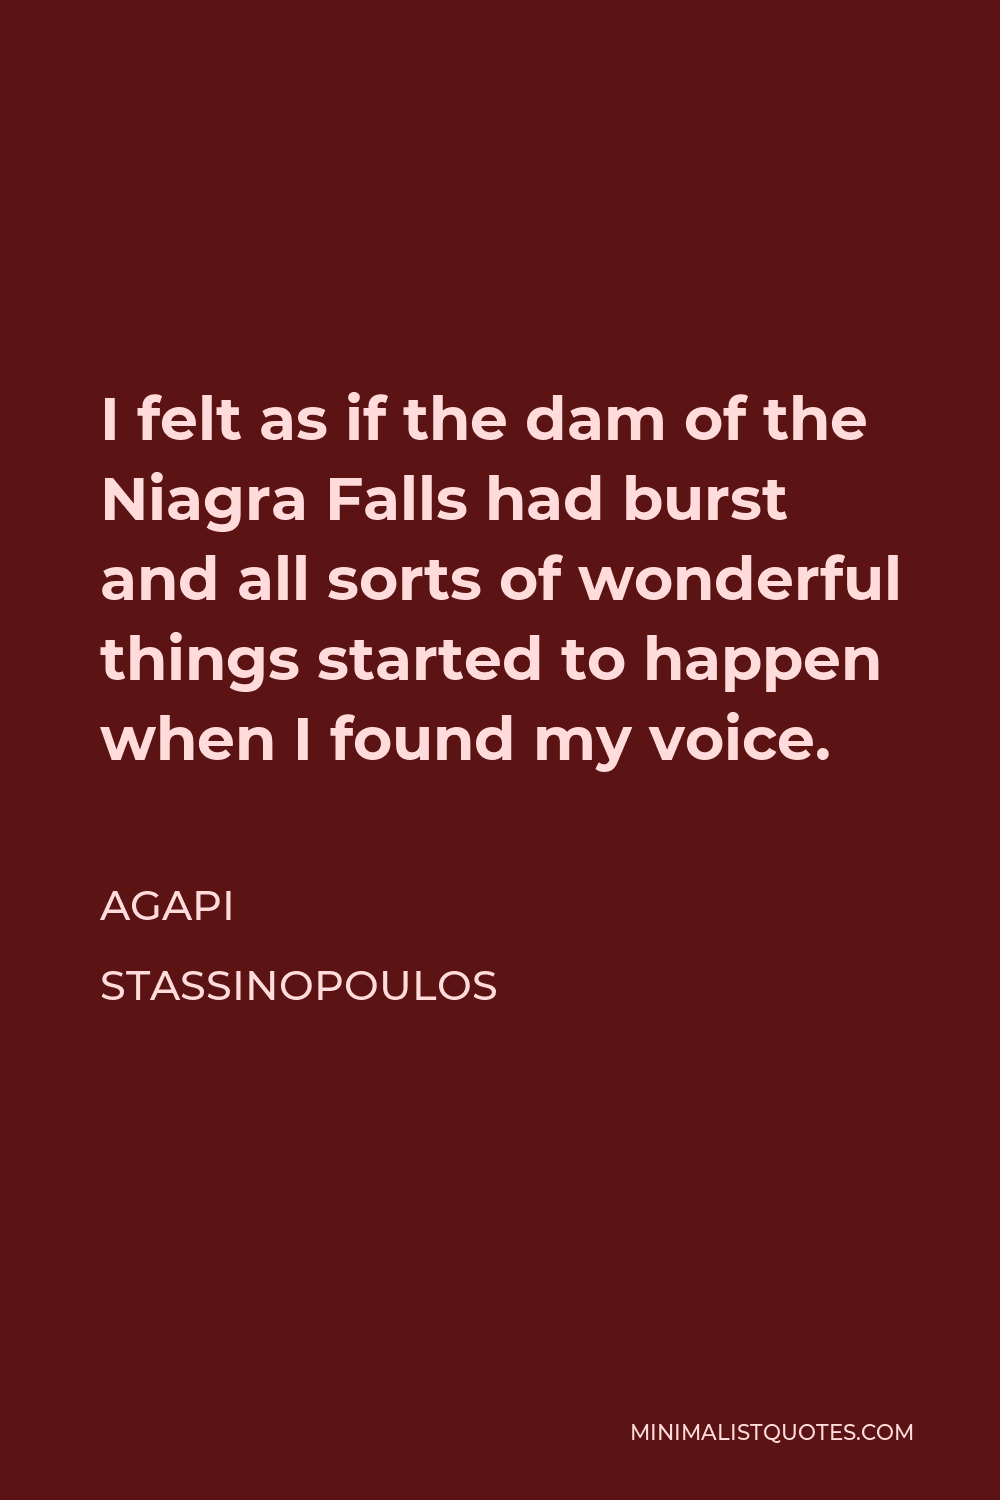 Agapi Stassinopoulos Quote - I felt as if the dam of the Niagra Falls had burst and all sorts of wonderful things started to happen when I found my voice.